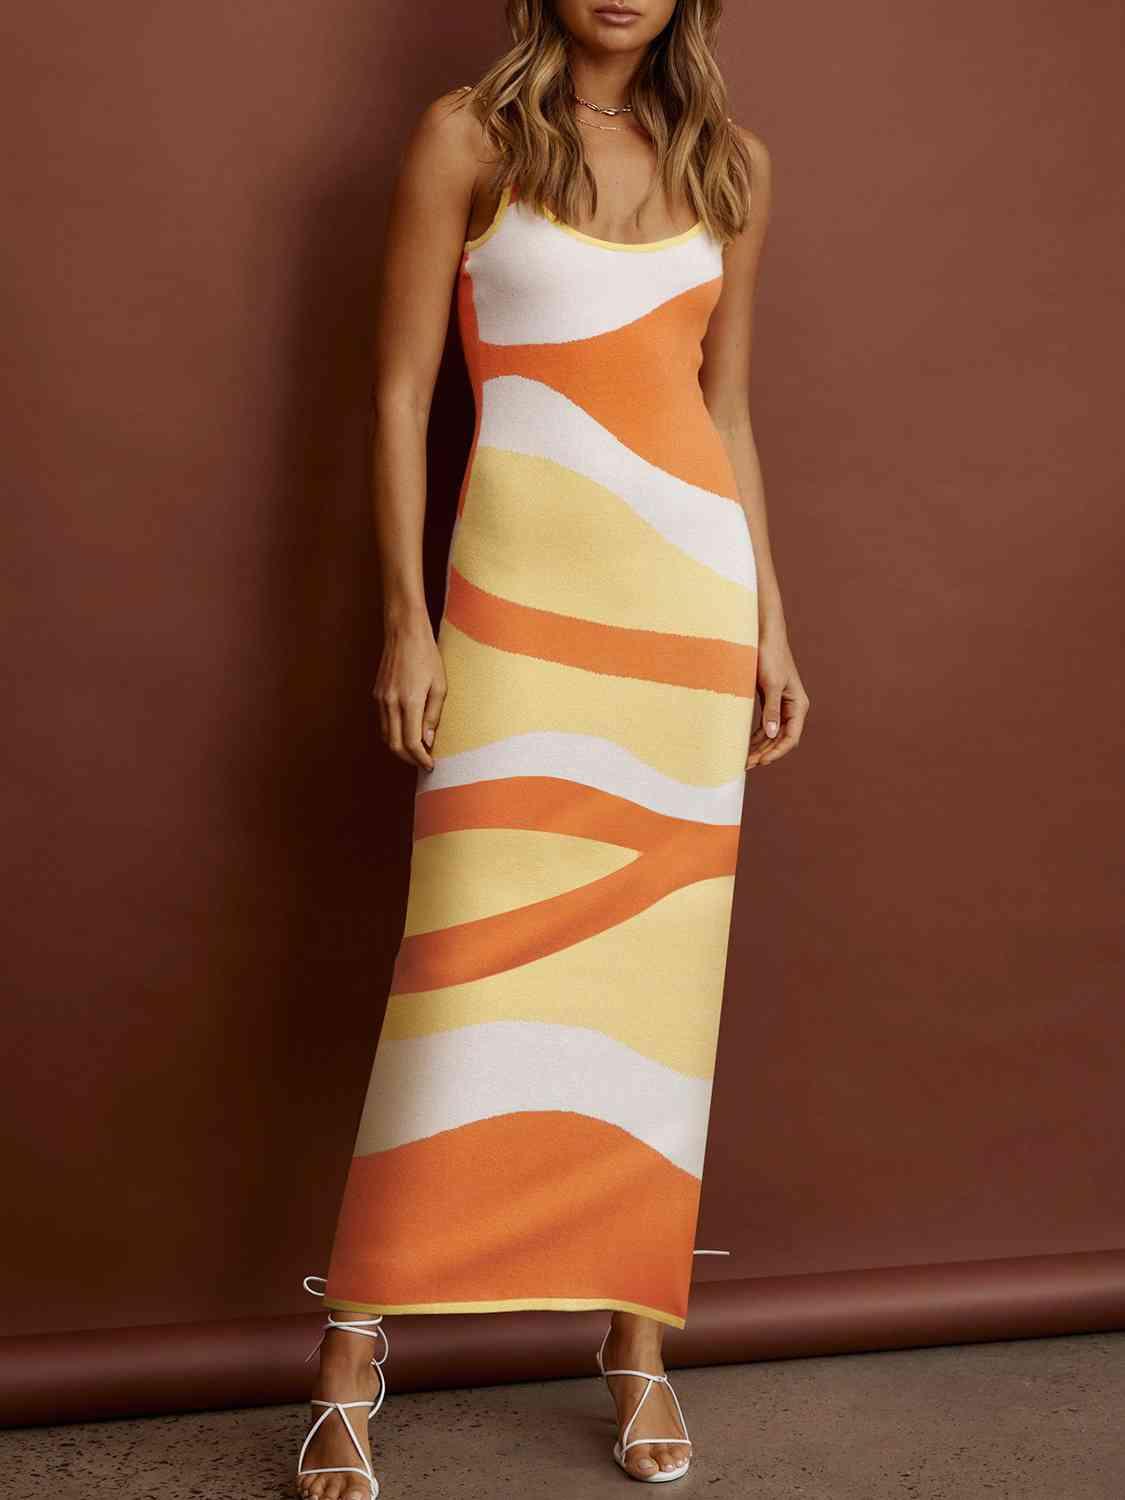 a woman in an orange and white striped dress